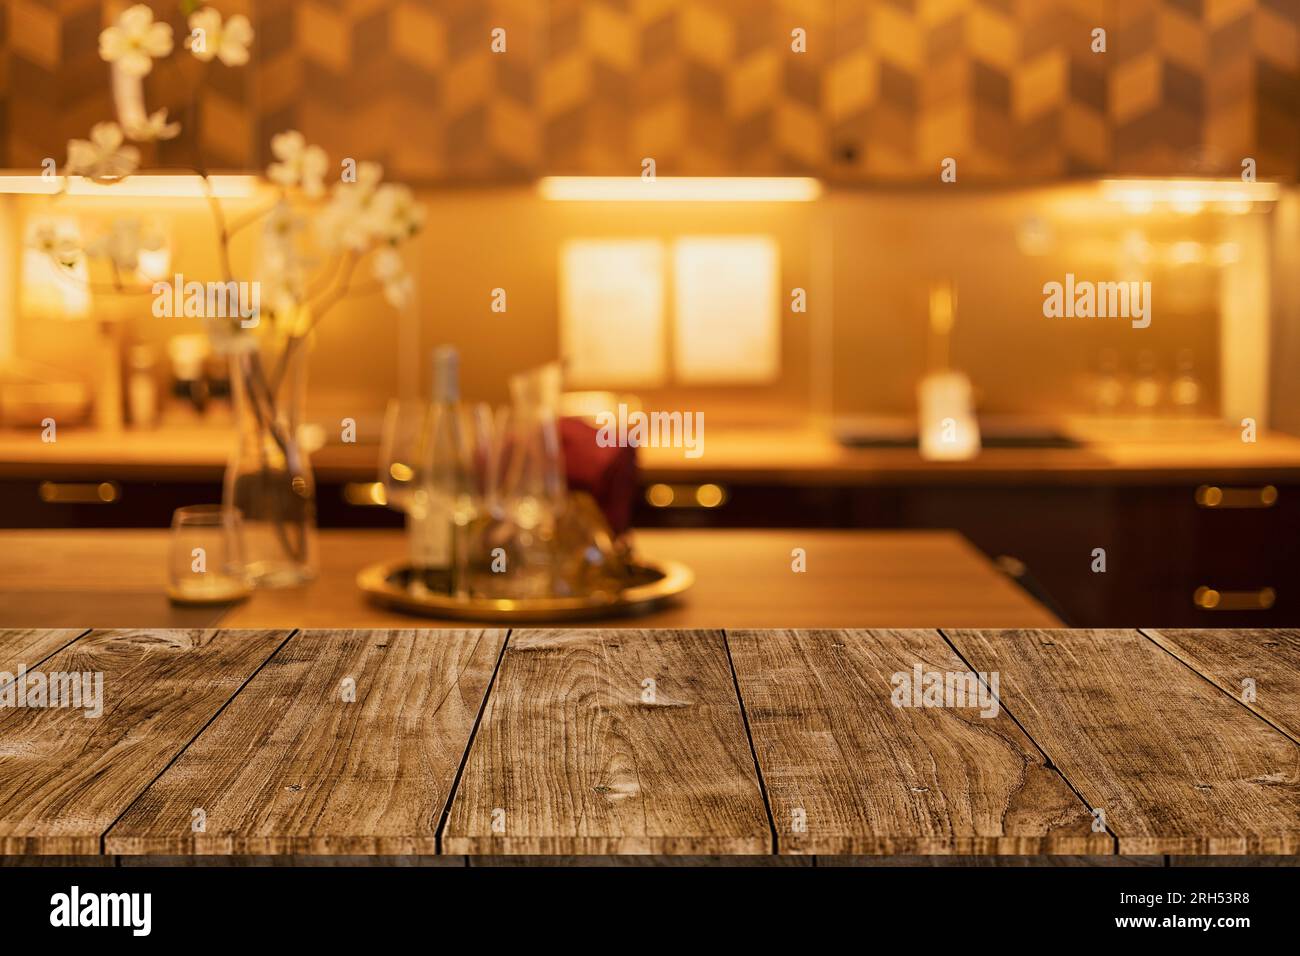 modern luxury kitchen black golden warm tone with wooden tabletop space for montage display utensil products. Stock Photo